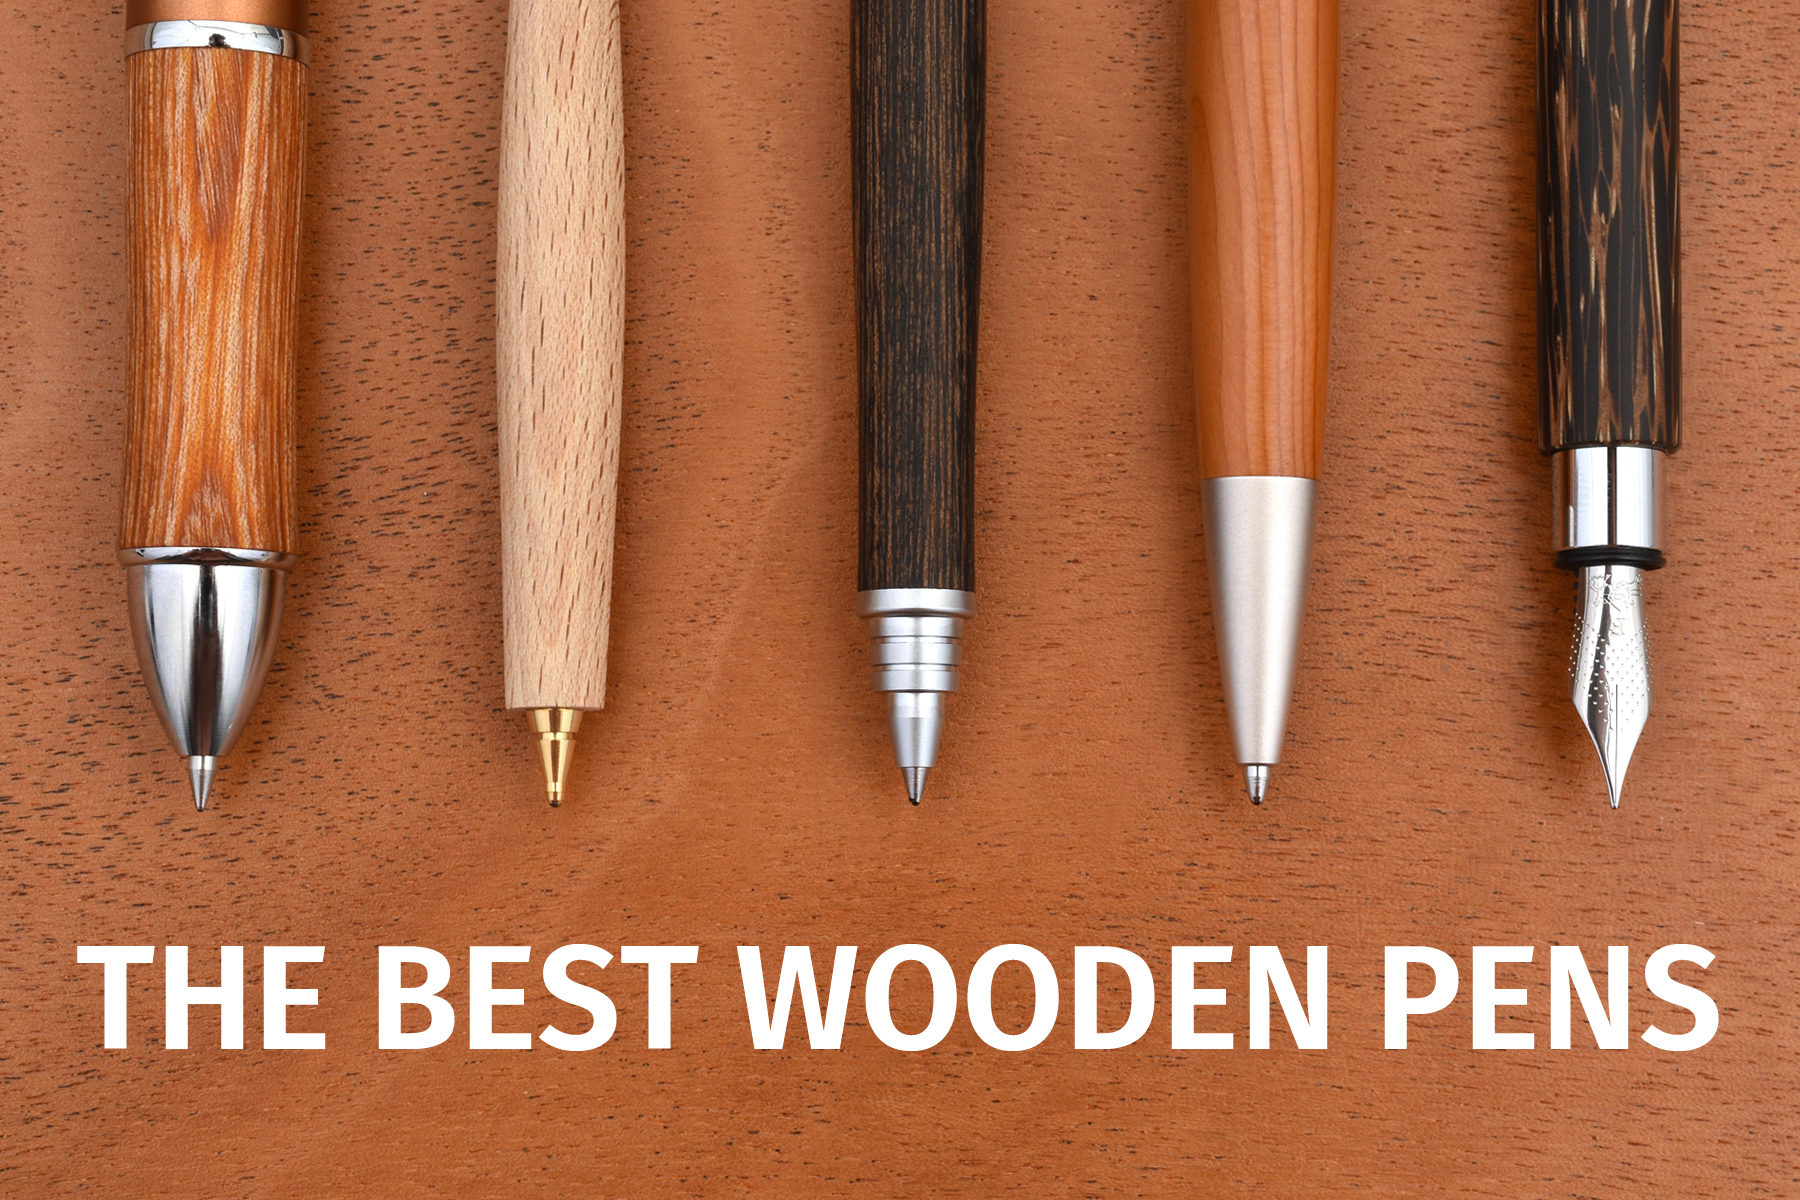 Luxury Wooden Ballpoint Pen Gift Set with Business Pen Case Display Nice Writing Pen with Box and Gel Ink Refills